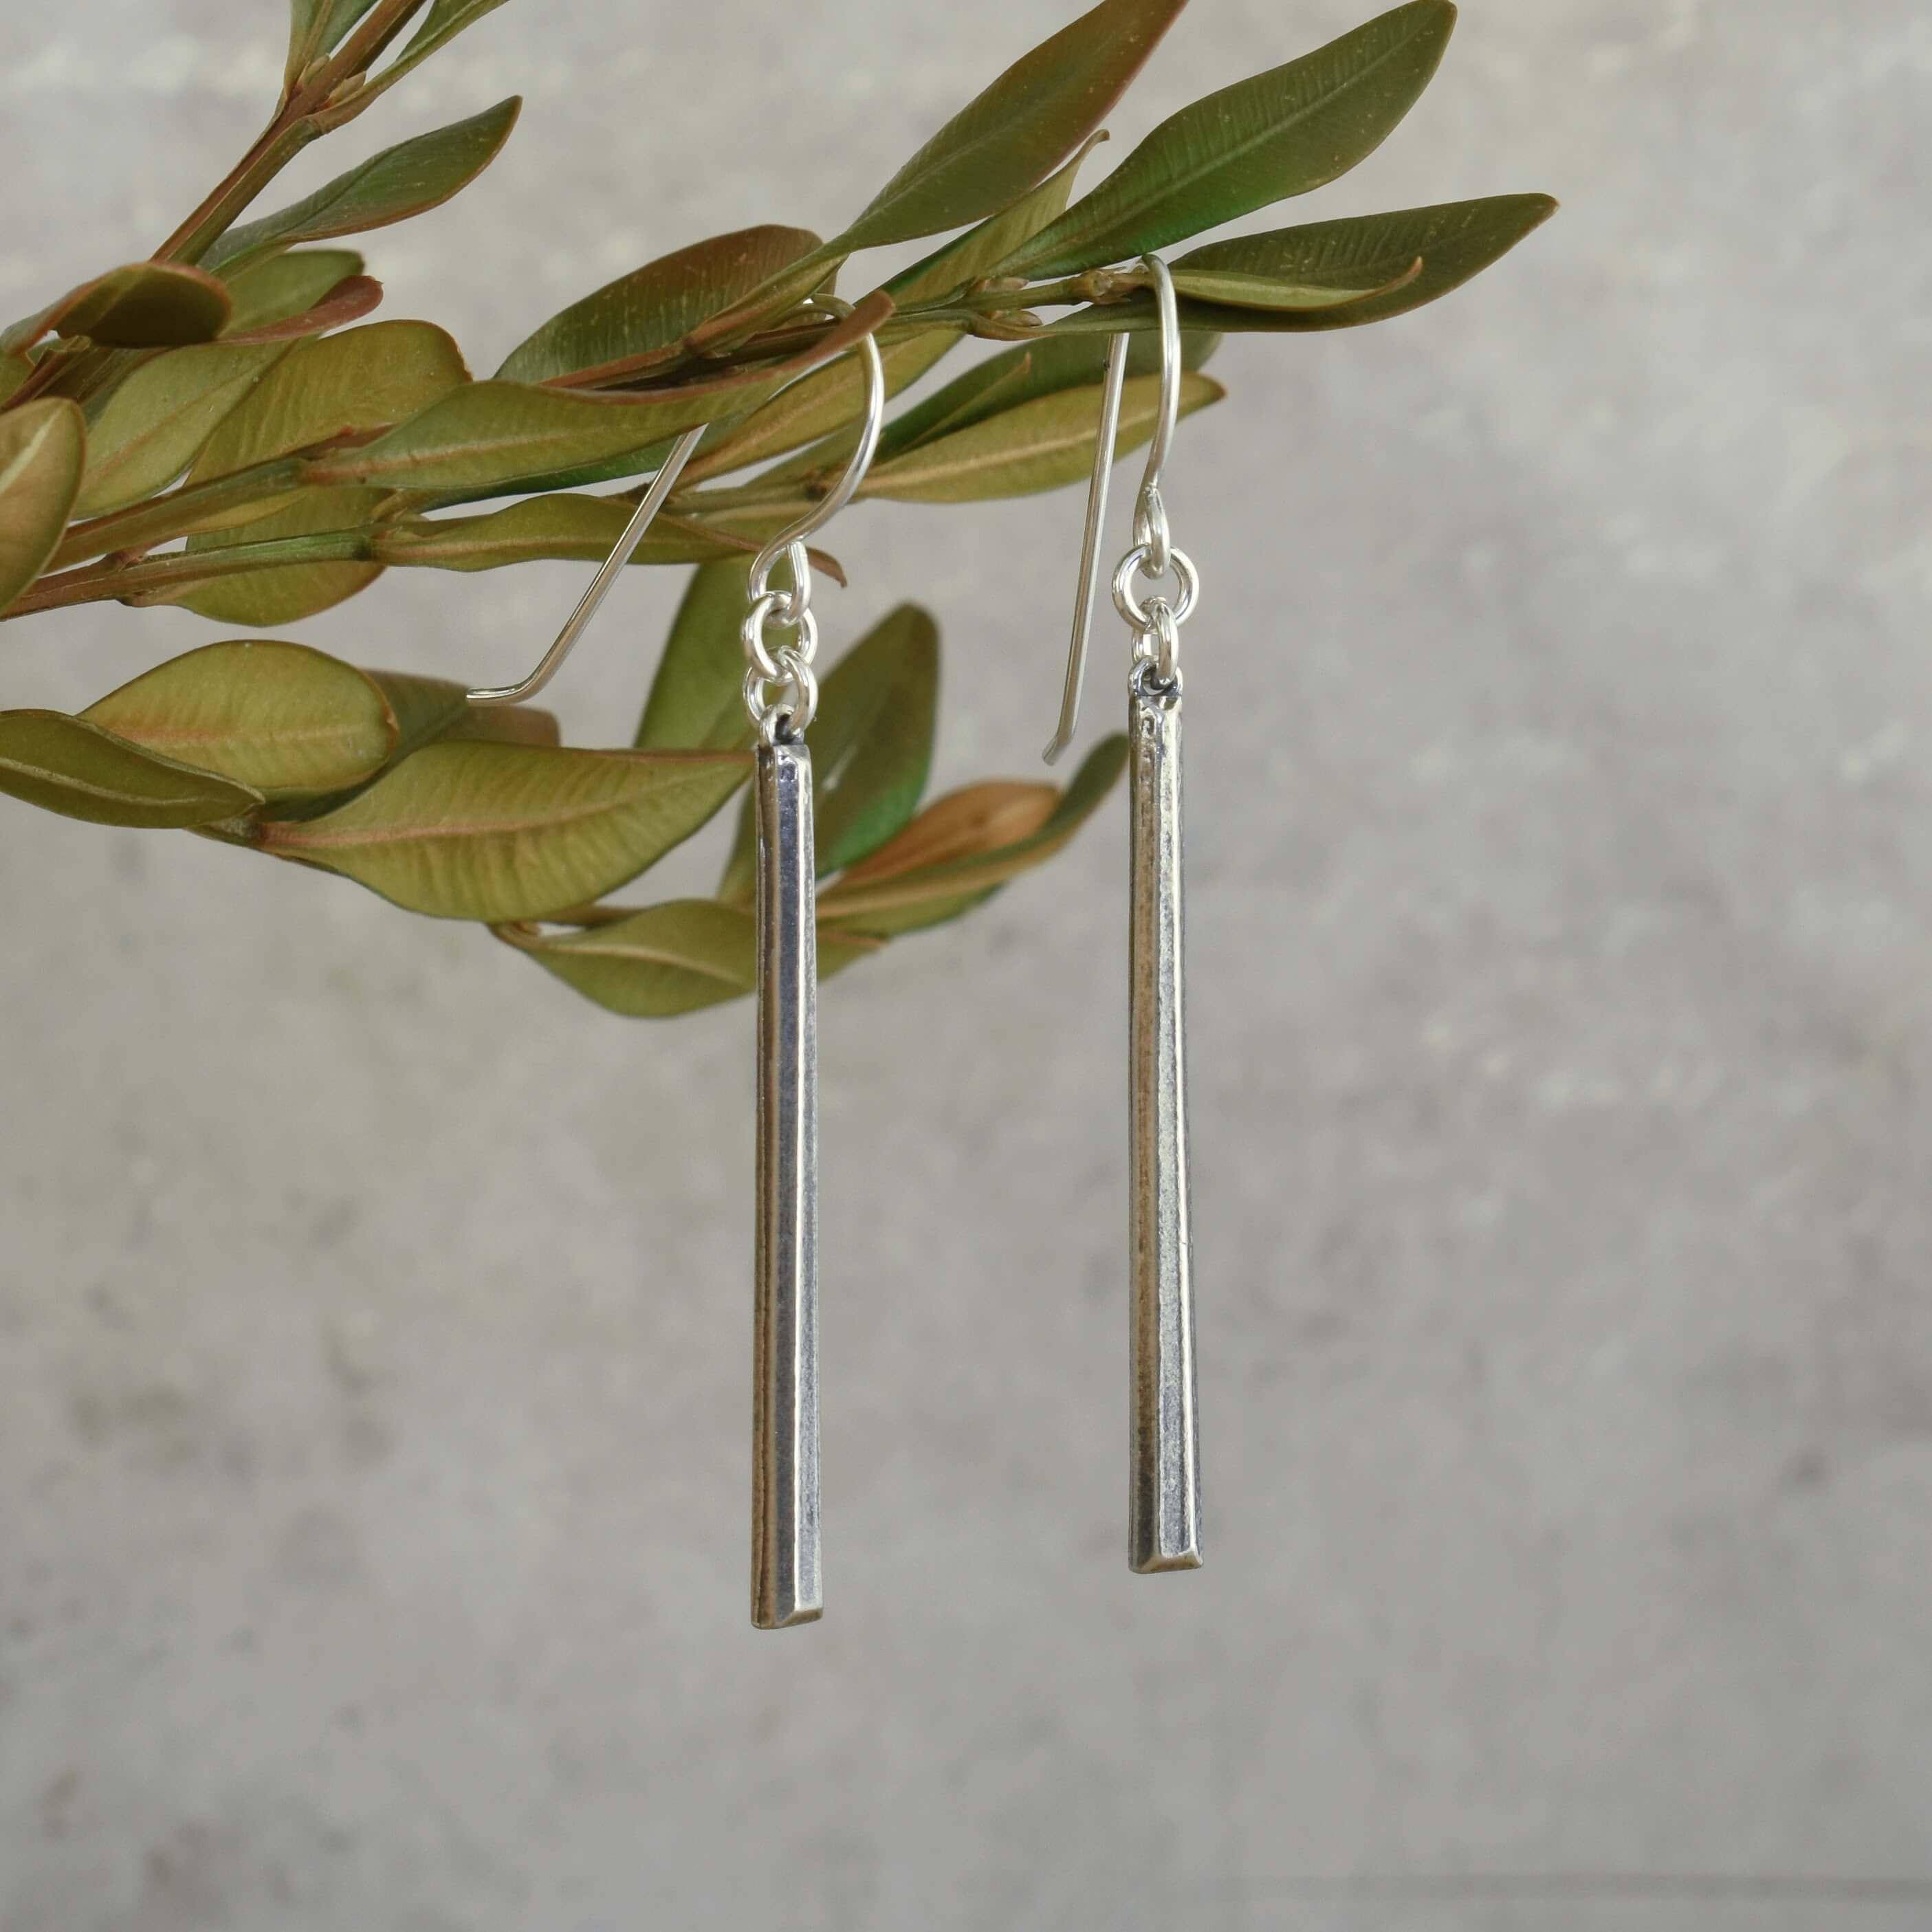 Better Together Earrings in .925 sterling silver